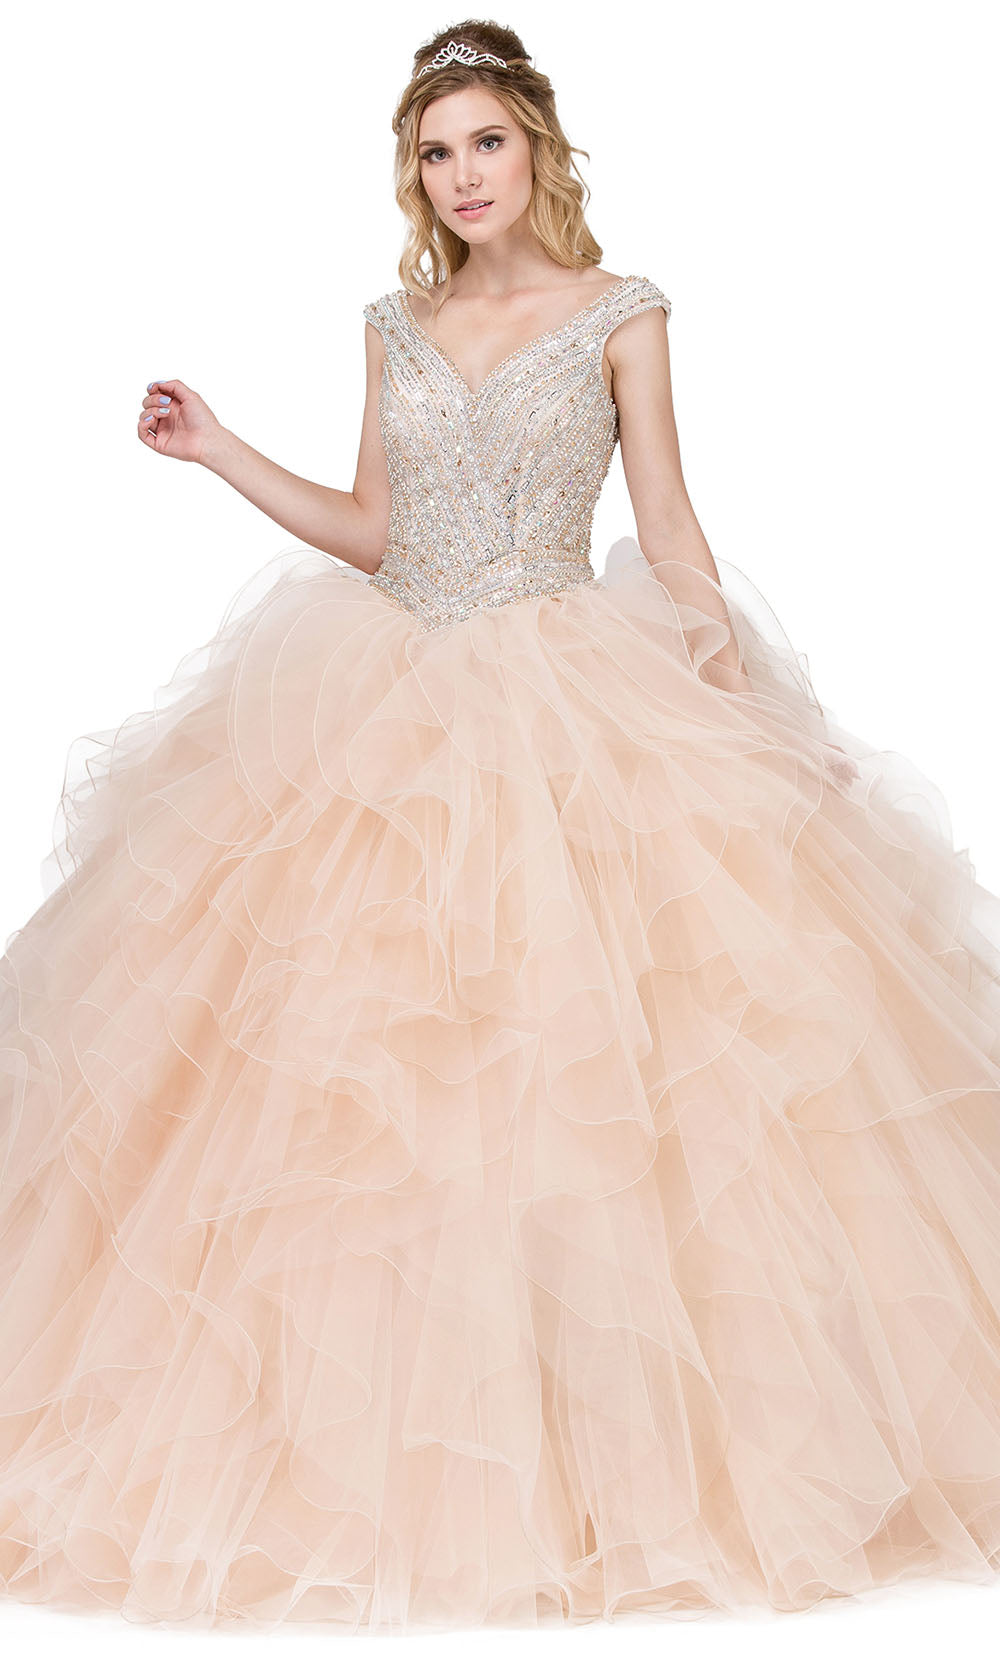 Dancing Queen - 1273 Embellished V Neck Ruffled Ballgown In Neutral